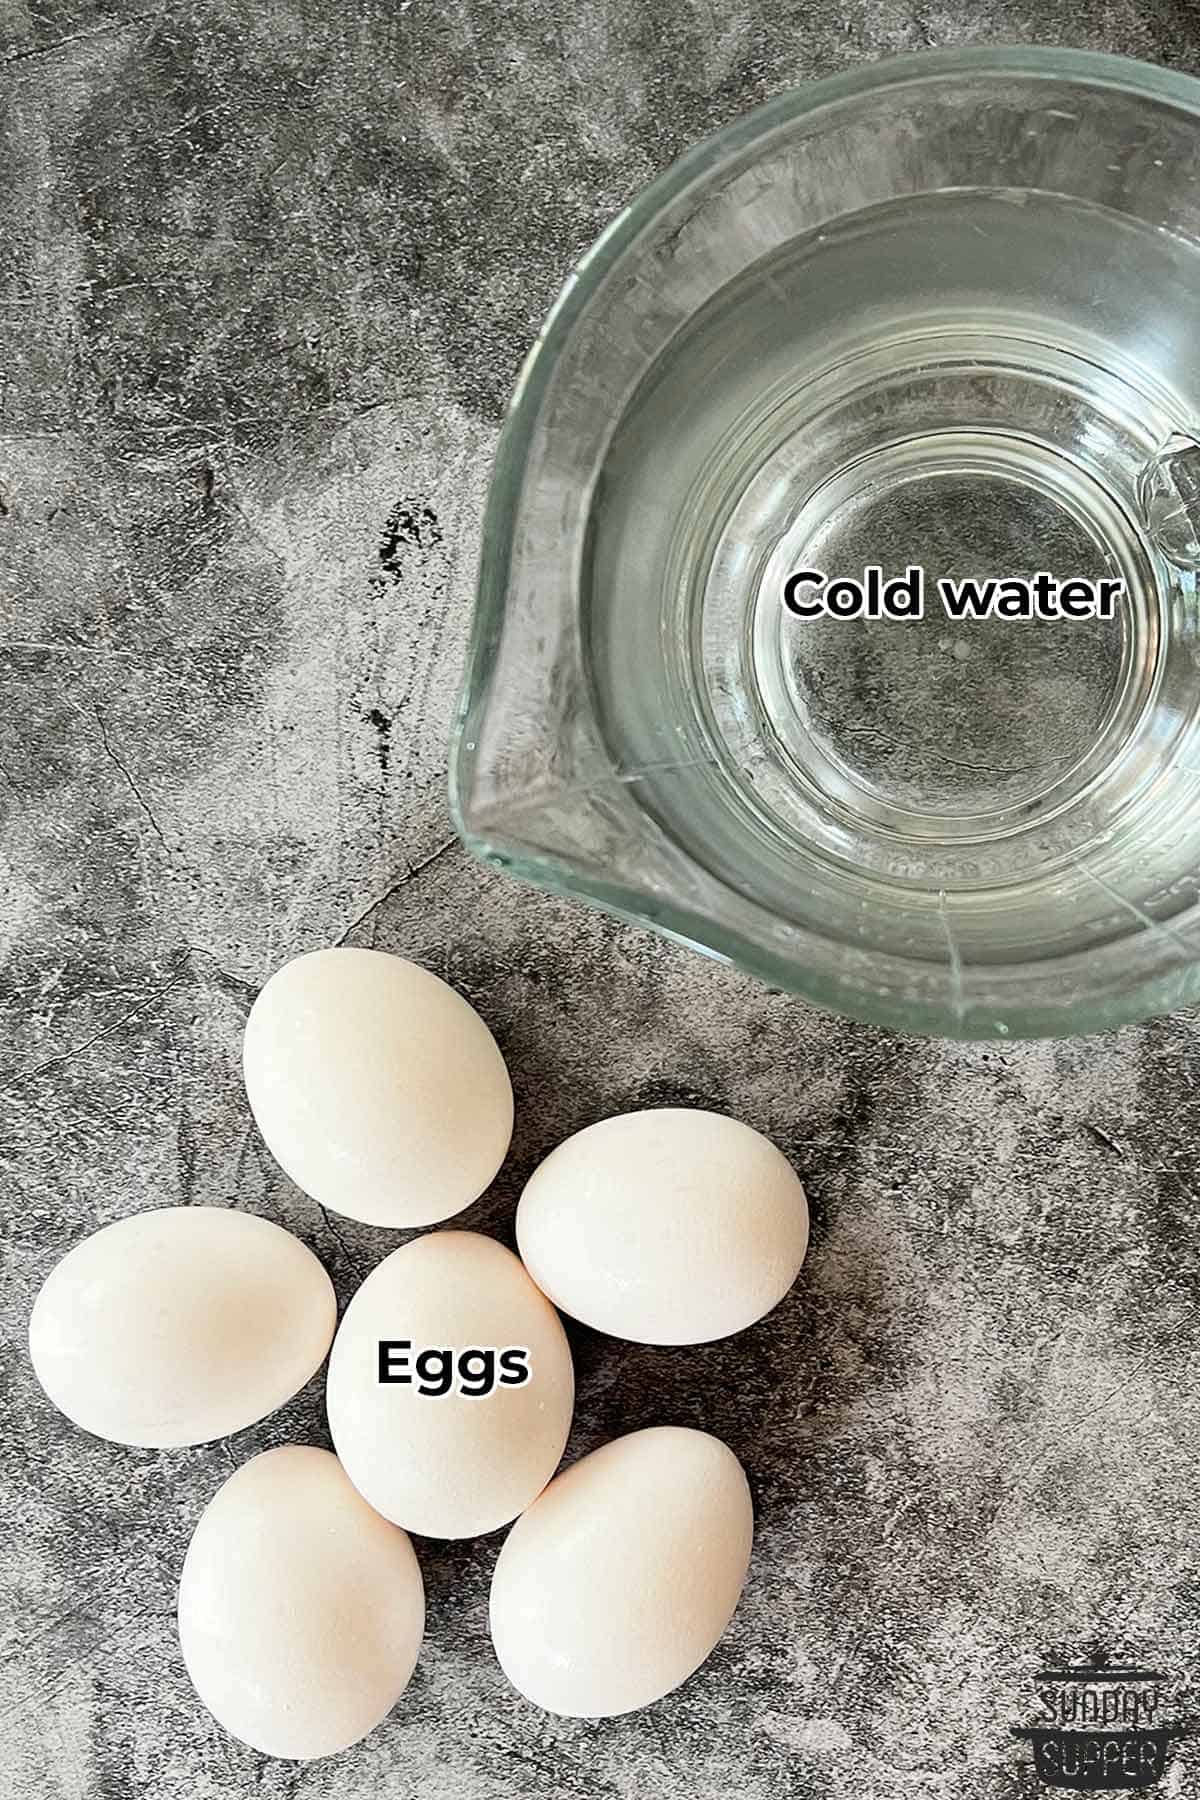 eggs and water with labels